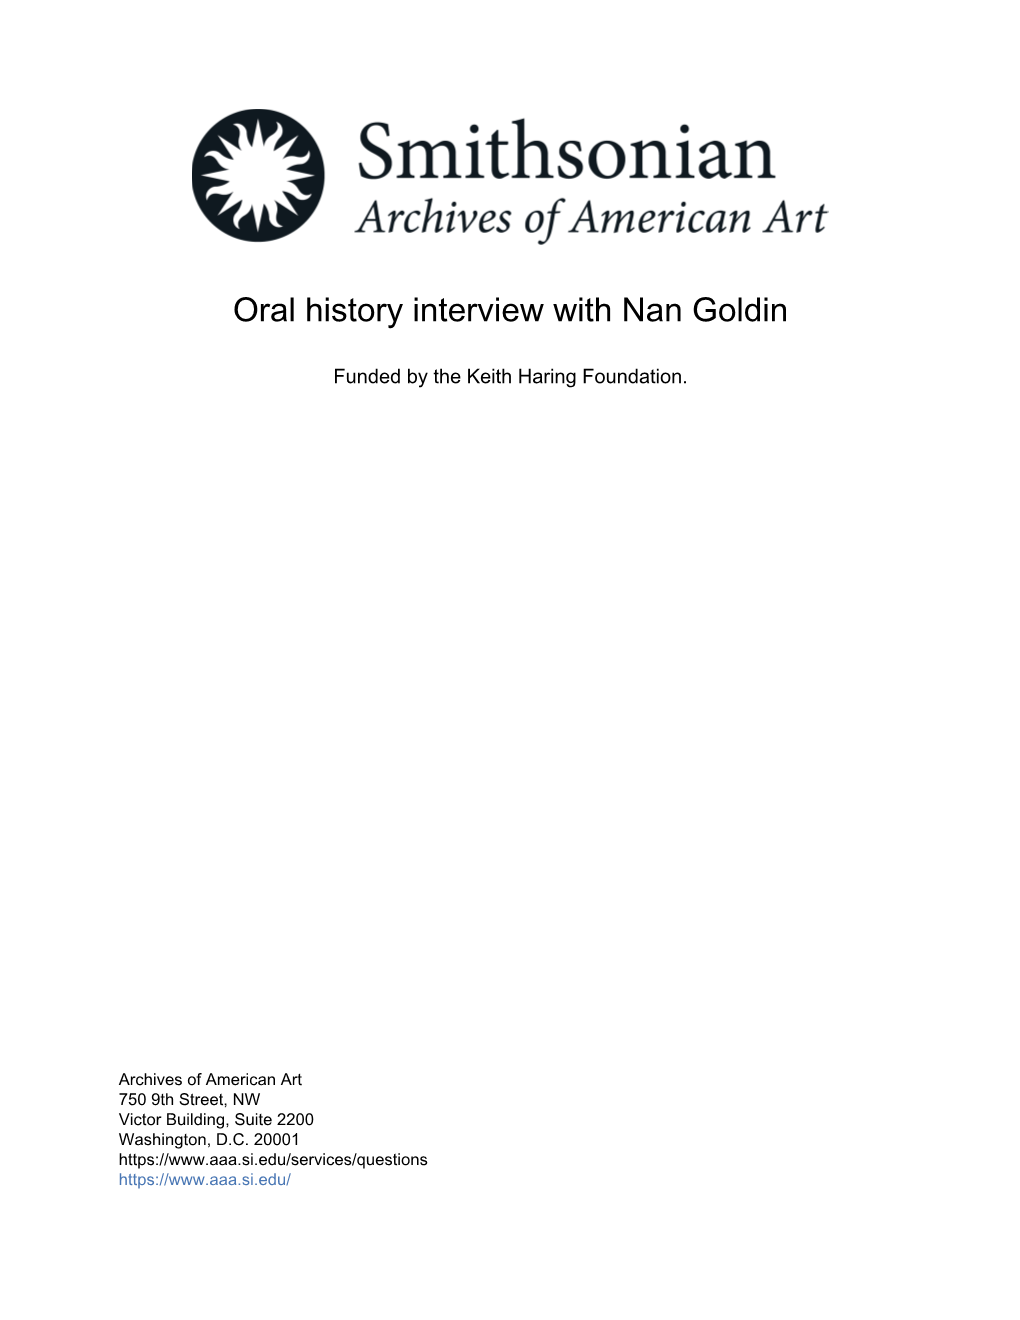 Oral History Interview with Nan Goldin